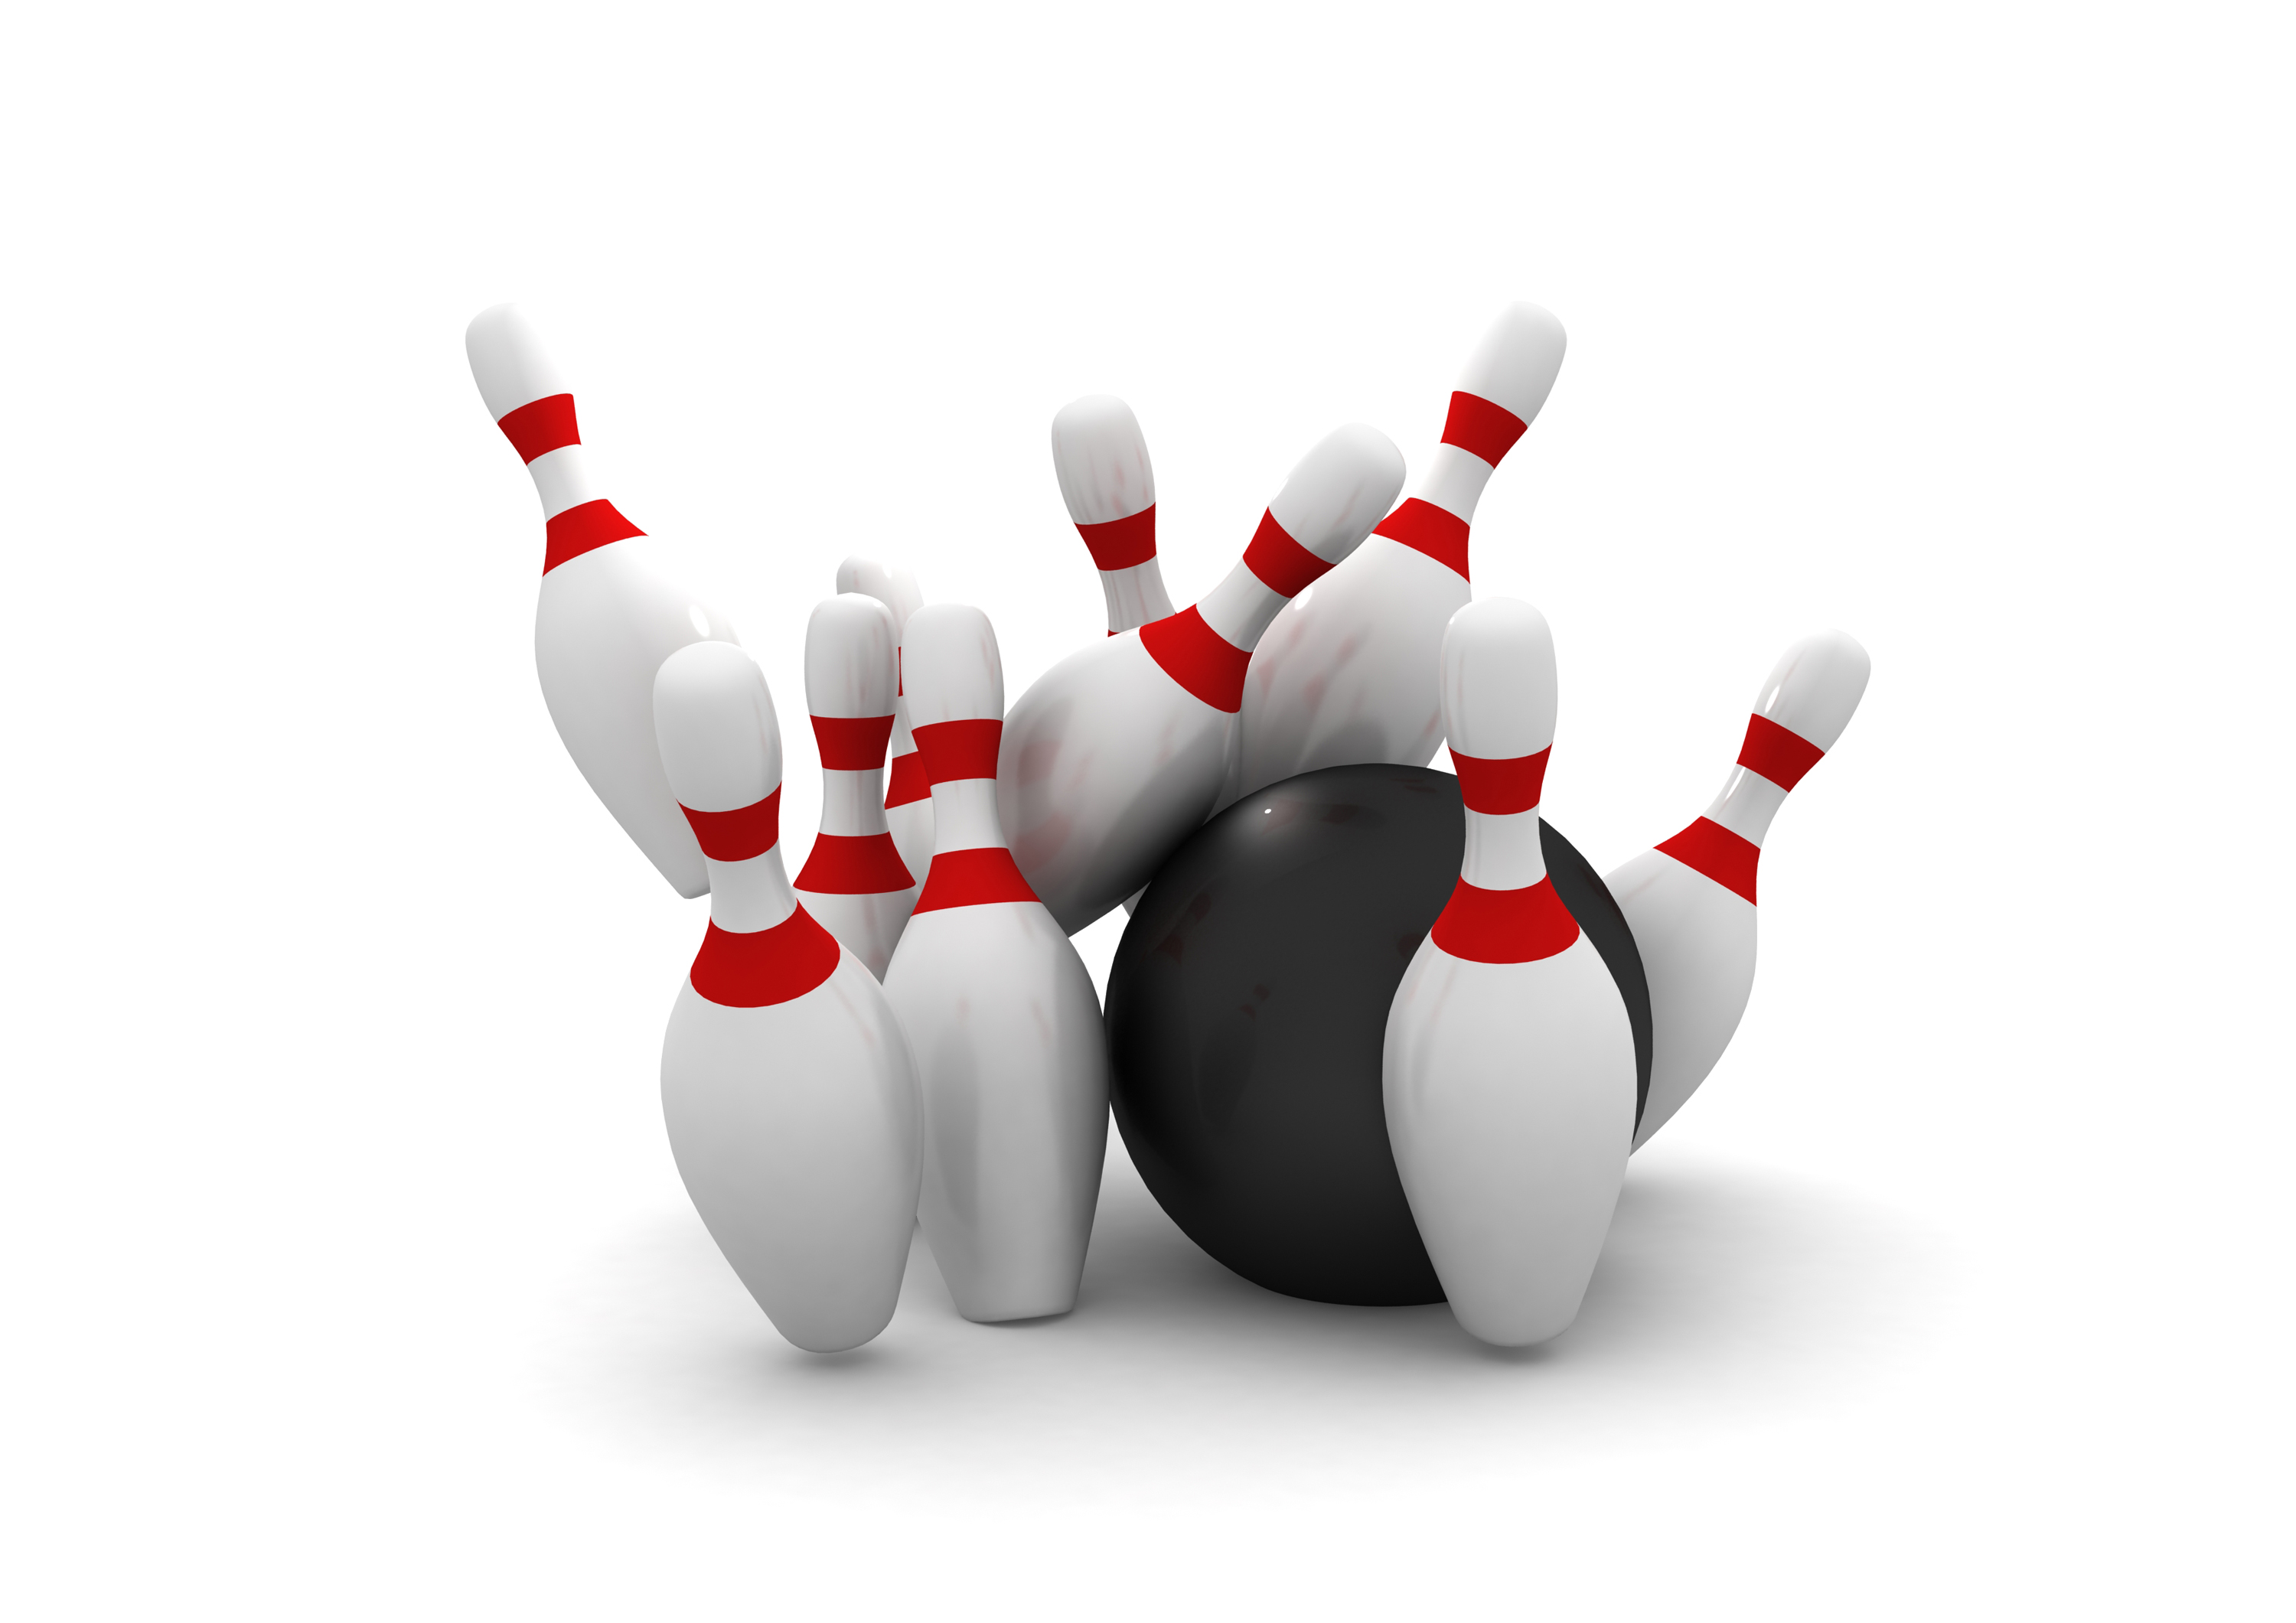 River City Recreation - Evansville, IN | Bowling Alley and Sports Bar